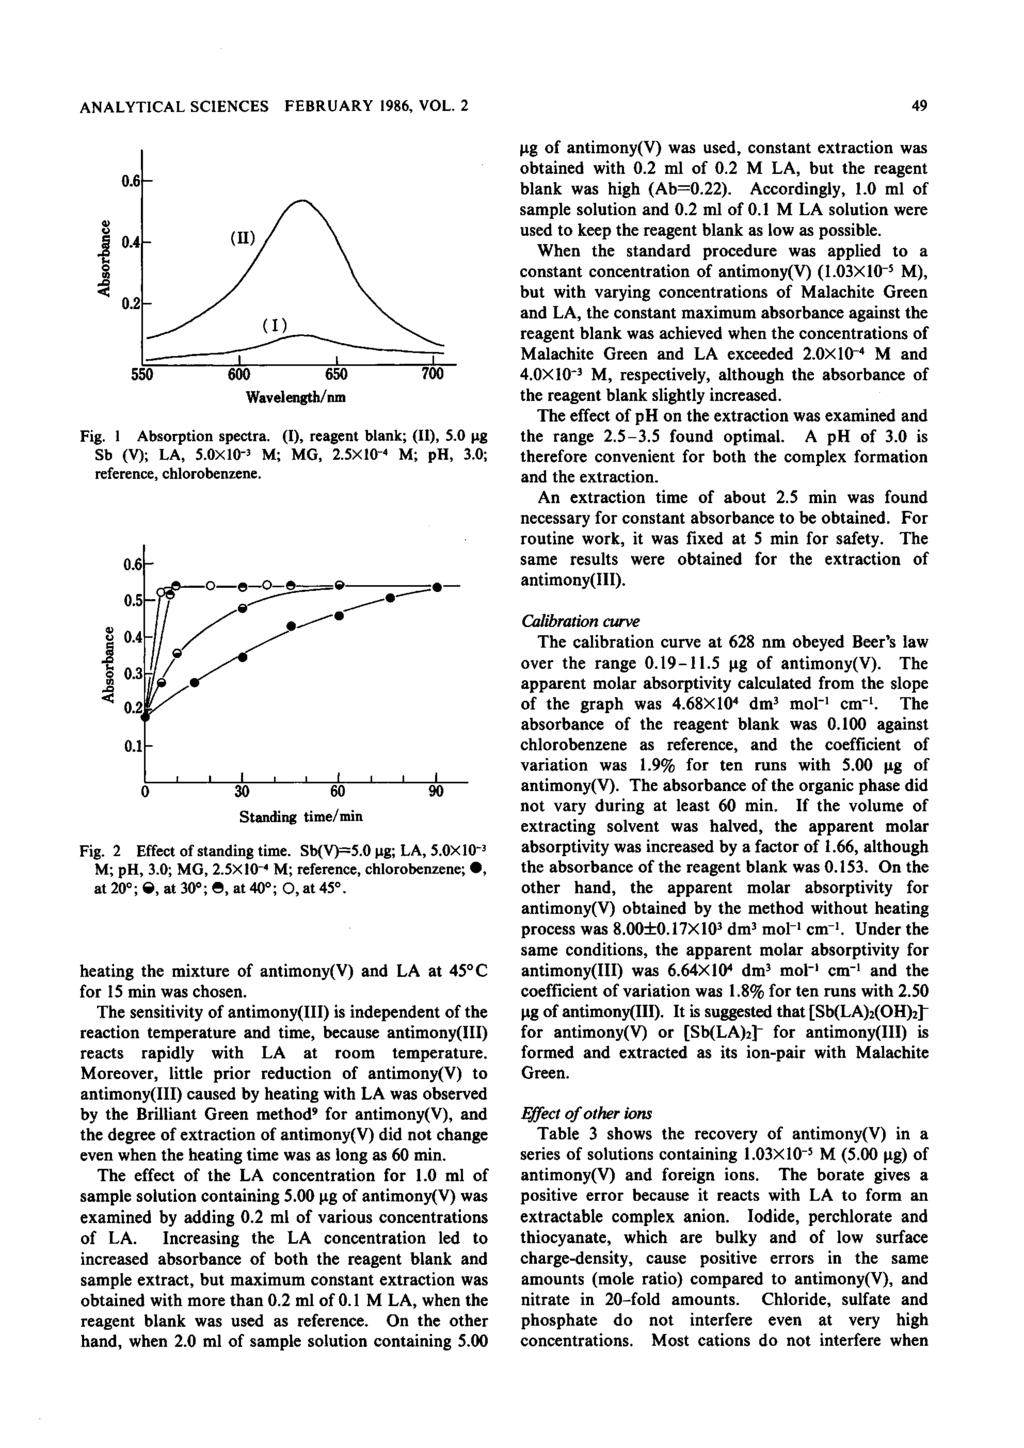 ANALYTICAL SCIENCES FEBRUARY 1986, VOL. 2 49 Fig. 1 Absorption spectra. (I), reagent blank; (II), 5.0.tg Sb (V); LA, 5.0X103 M; MG, 2.5X10-4 M; ph, 3.0; reference, chlorobenzene. -3 Fig.